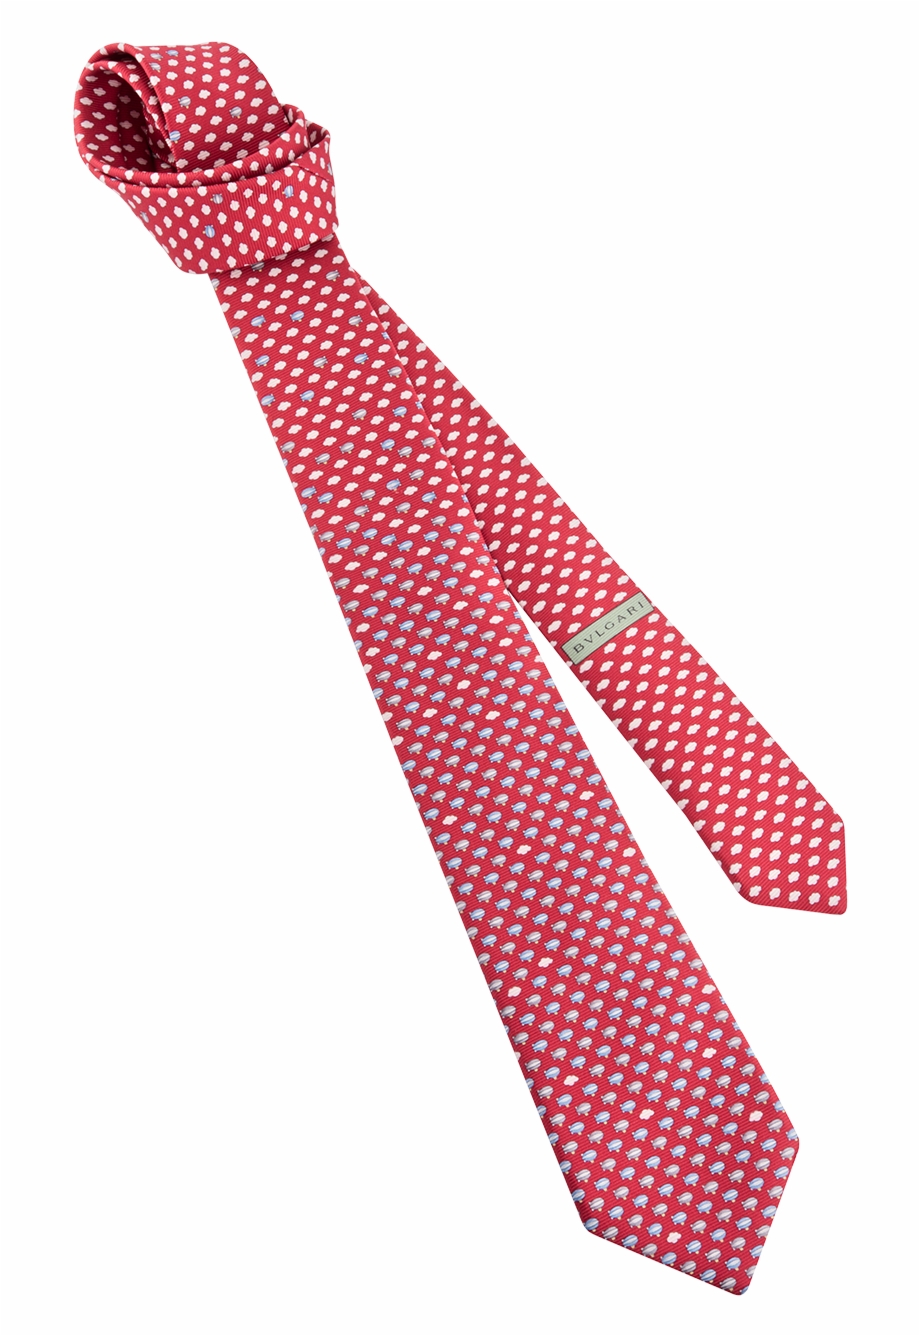 Free Red Tie Png, Download Free Red Tie Png png images, Free ClipArts ...